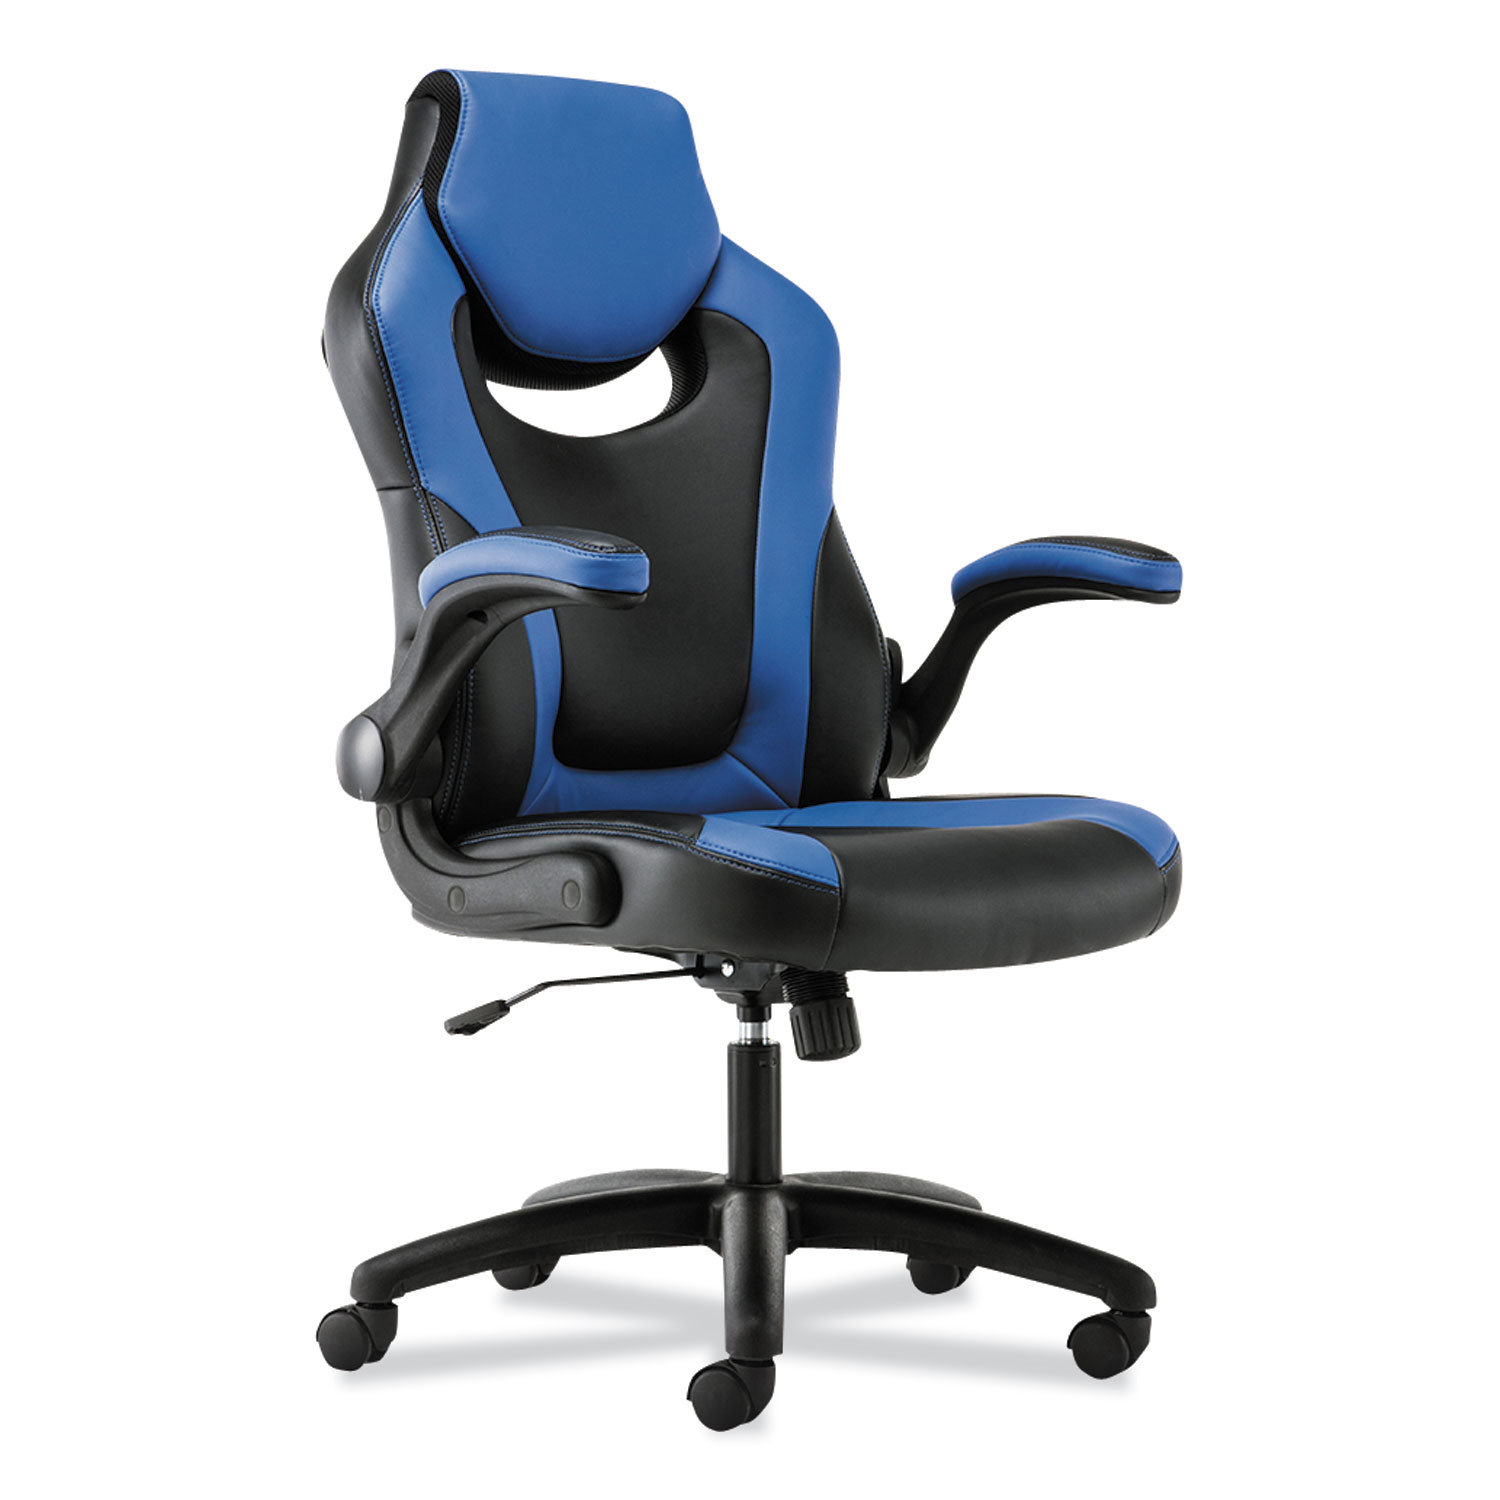  Sadie BSXVST913 9-Thirteen High-Back Racing Style Chair with Flip-Up Arms, Supports up to 225 lbs., Black Seat/Blue Back, Black Base (BSXVST913) 